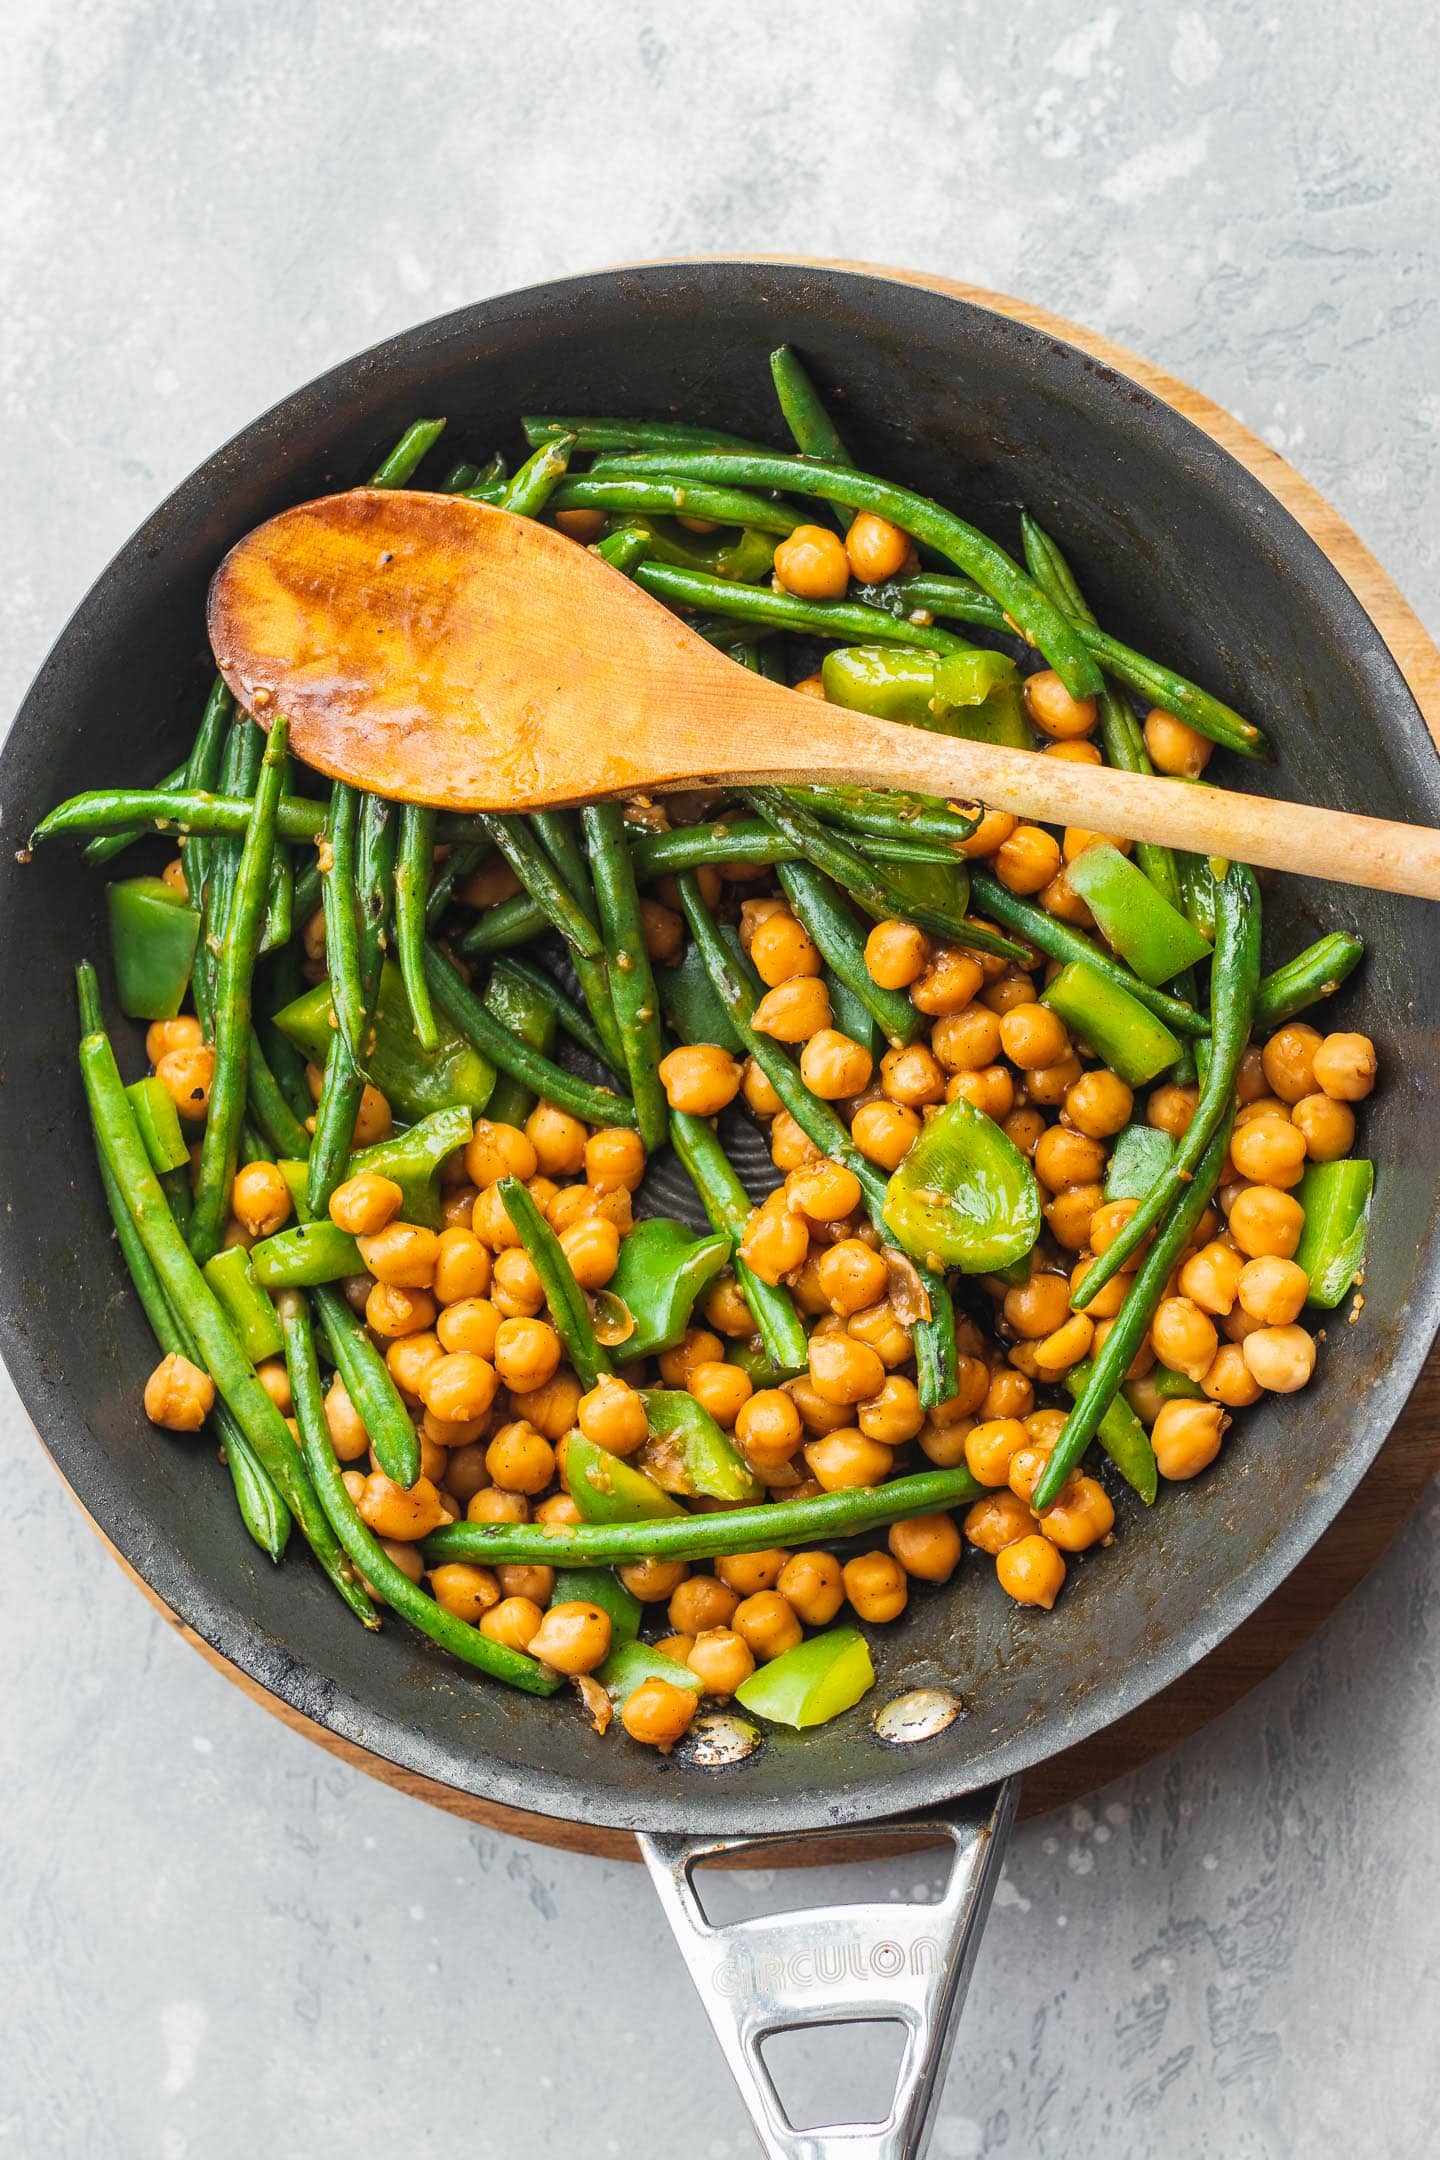 Frying pan with sweet and sour chickpeas and green beans